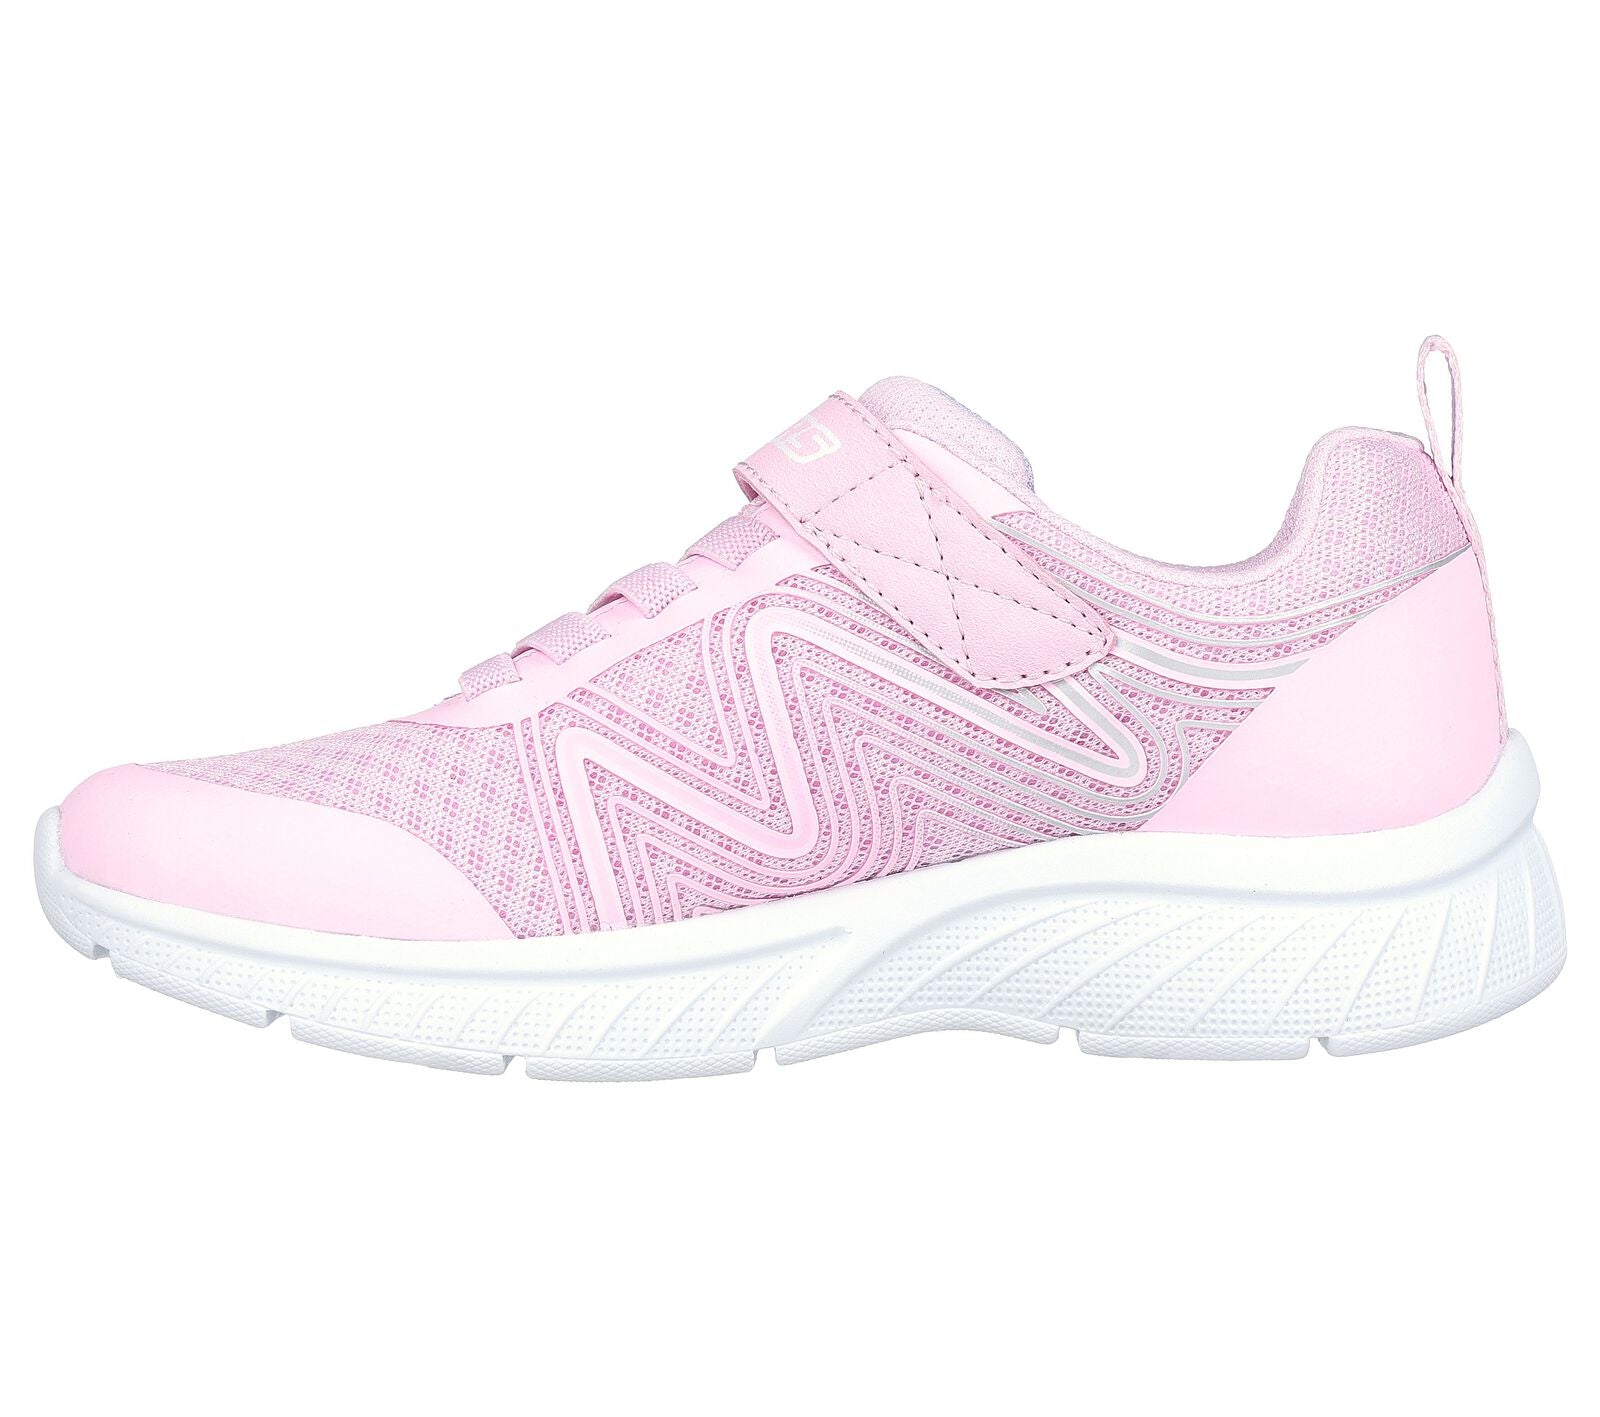 Skechers Swirl Sweet in pink, featuring the Skechers logo. Velcro fastening with flat elastic bungee laces. Left side view.